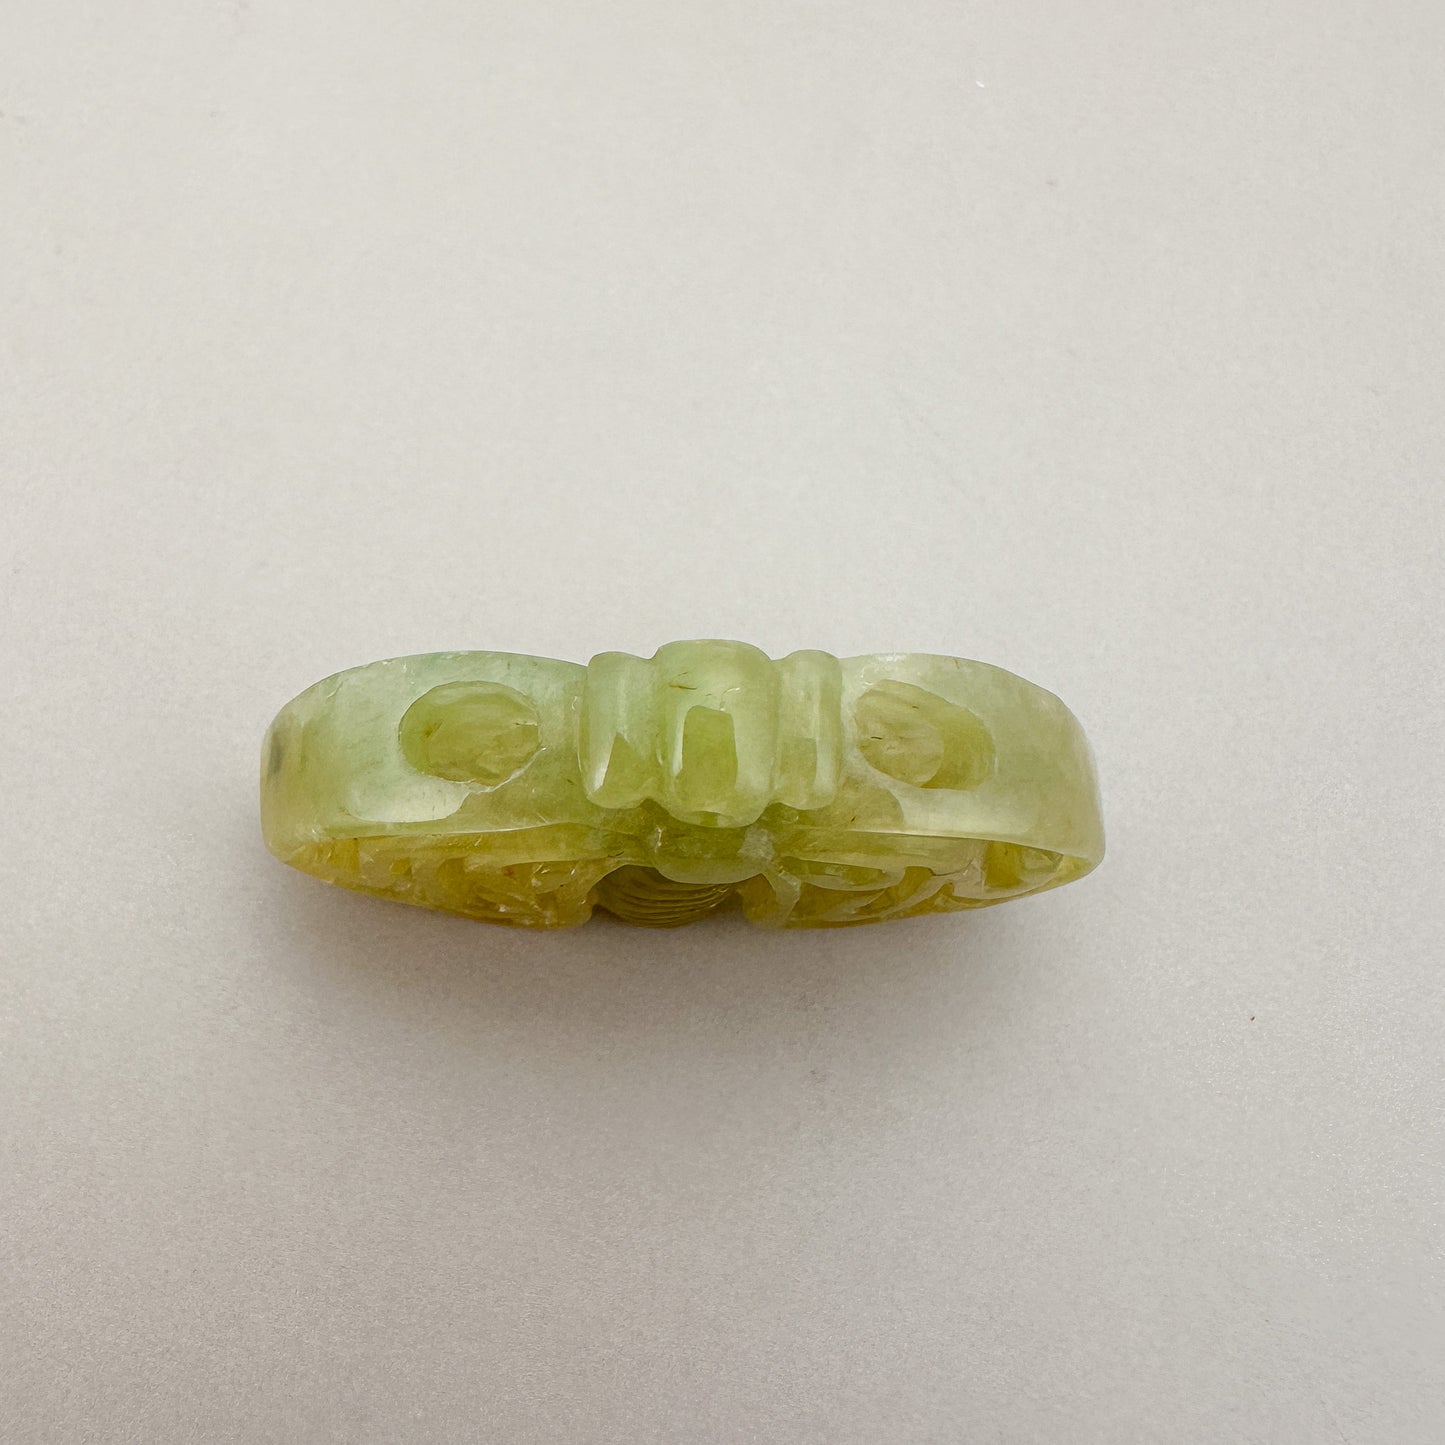 Green Jade Butterfly 28x17mm Carved Pendant - 1 pc. (P2940)